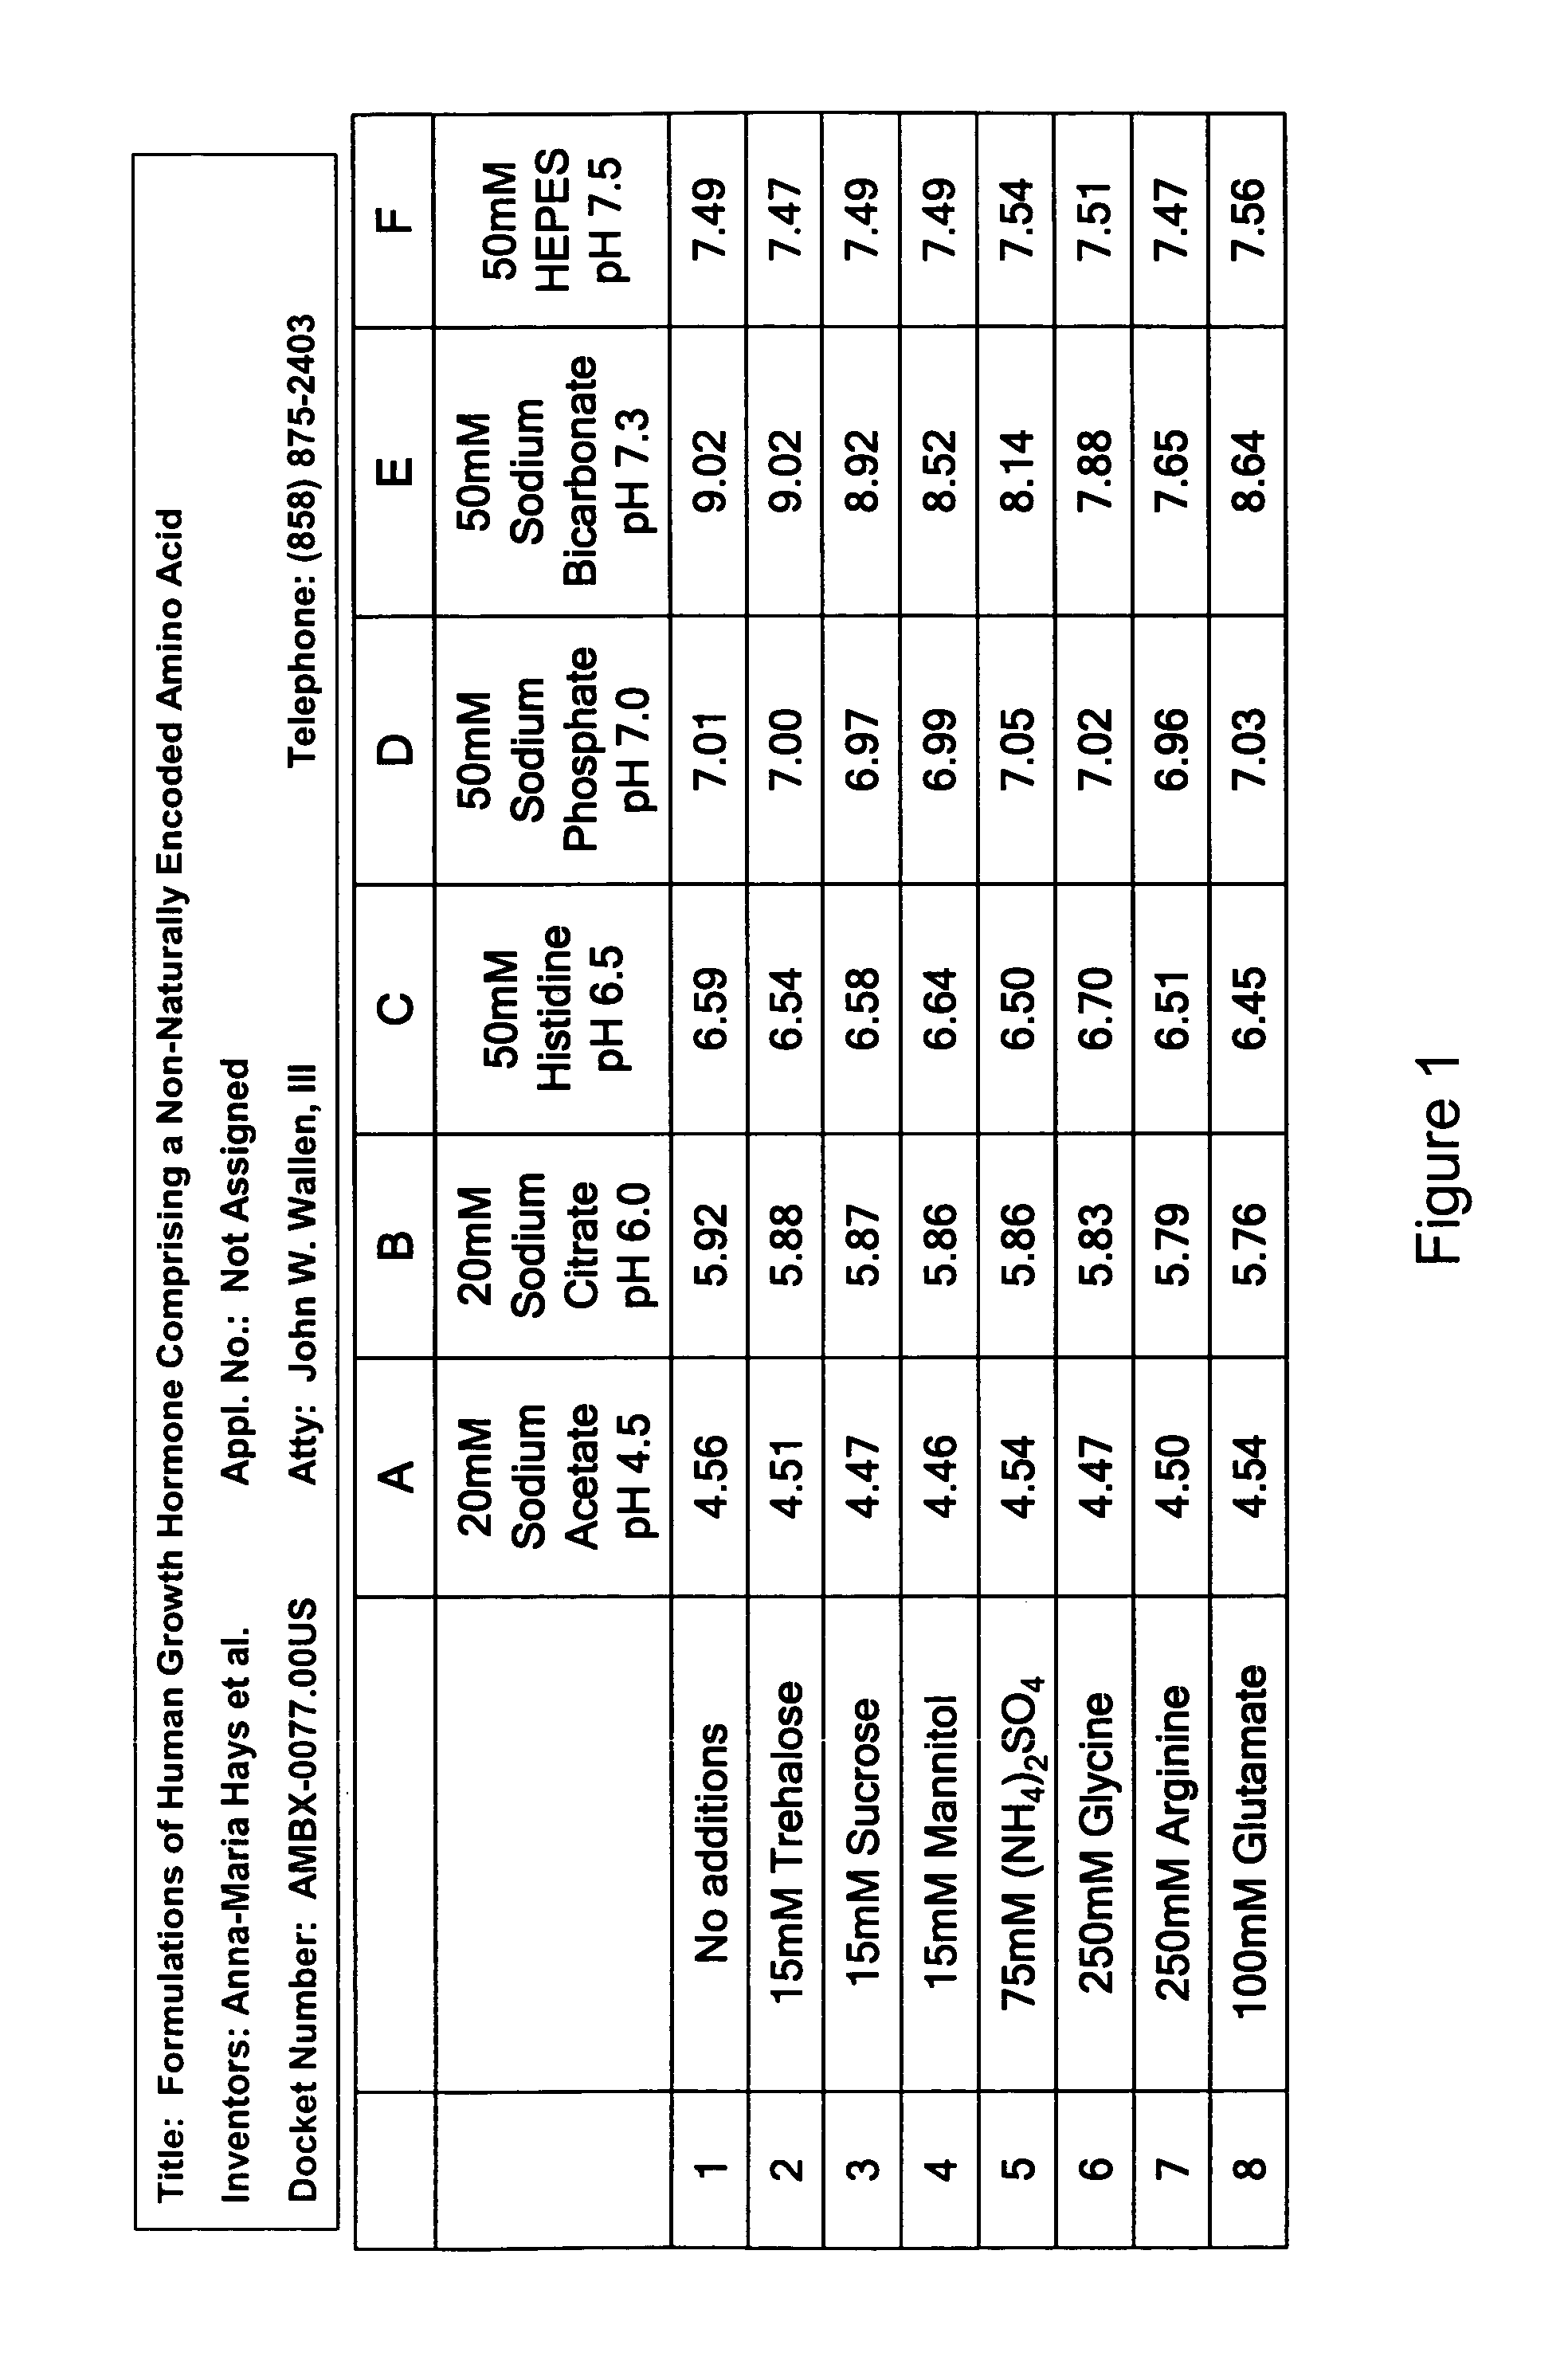 Formulations of human growth hormone comprising a non-naturally encoded amino acid at position 35